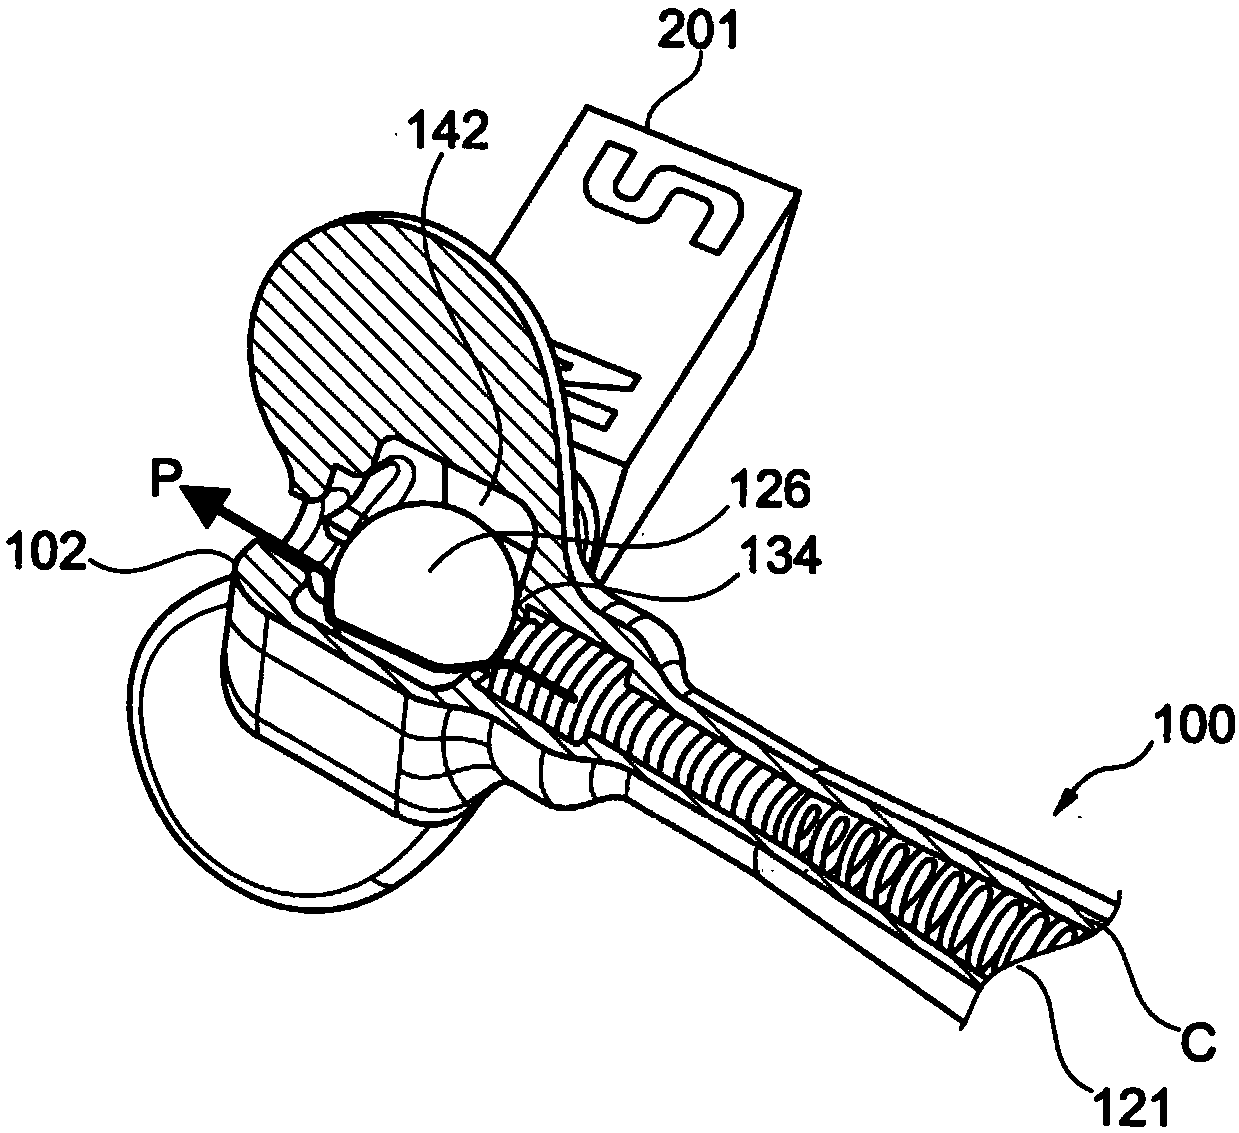 Urine flow control system and magnetic actuator device